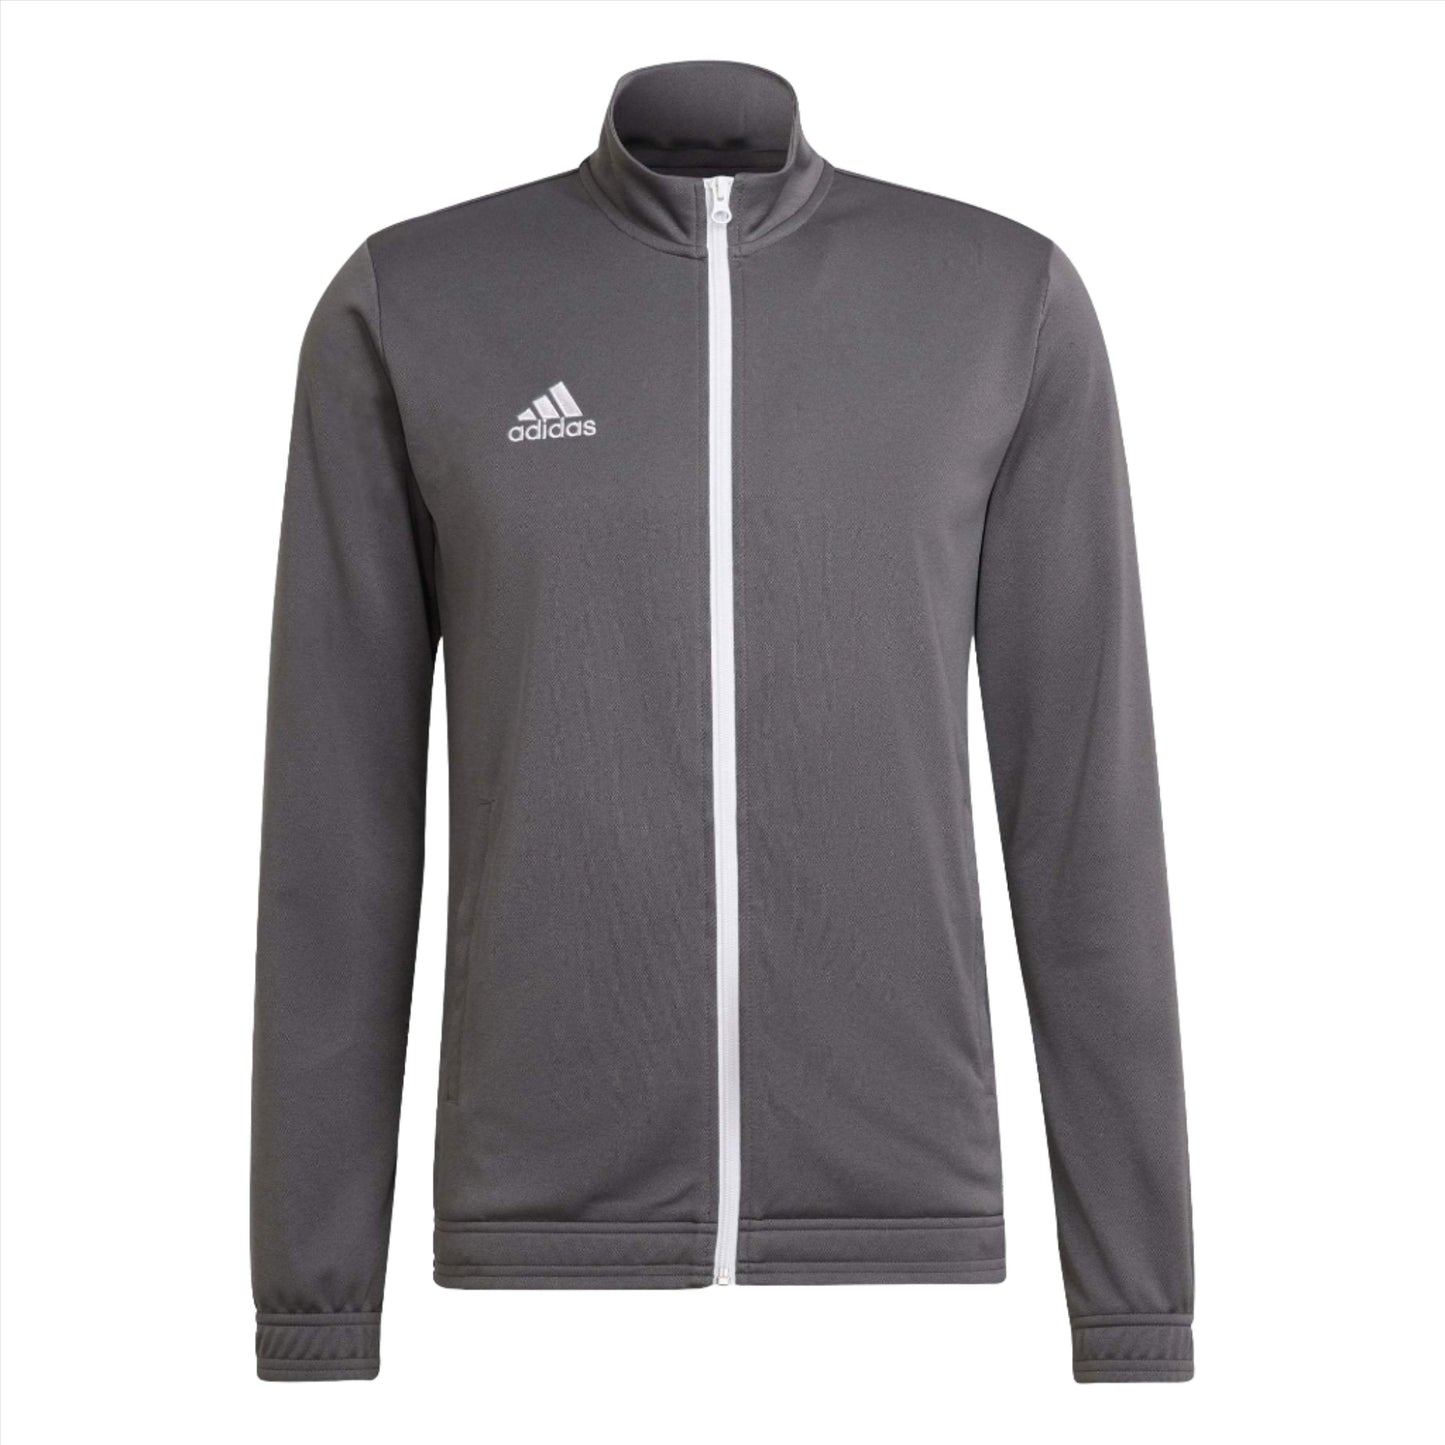 Entrada 22 Track Jacket by Adidas - The Luxury Promotional Gifts Company Limited